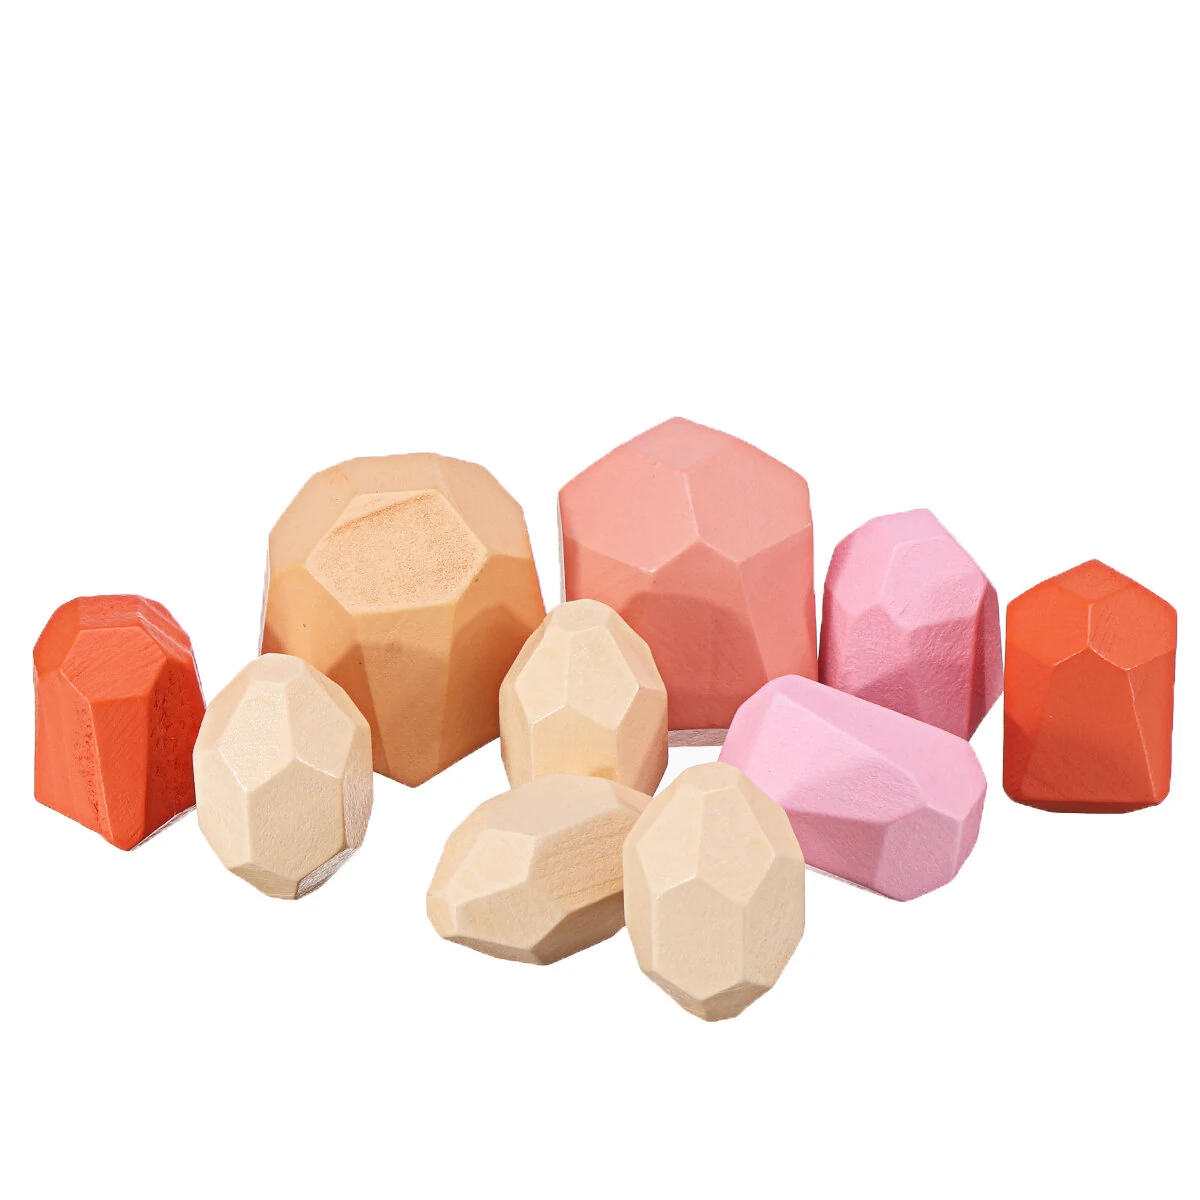 Children's wooden colored stone jenga building block toy educational toys creative stacking block balance game gift toy